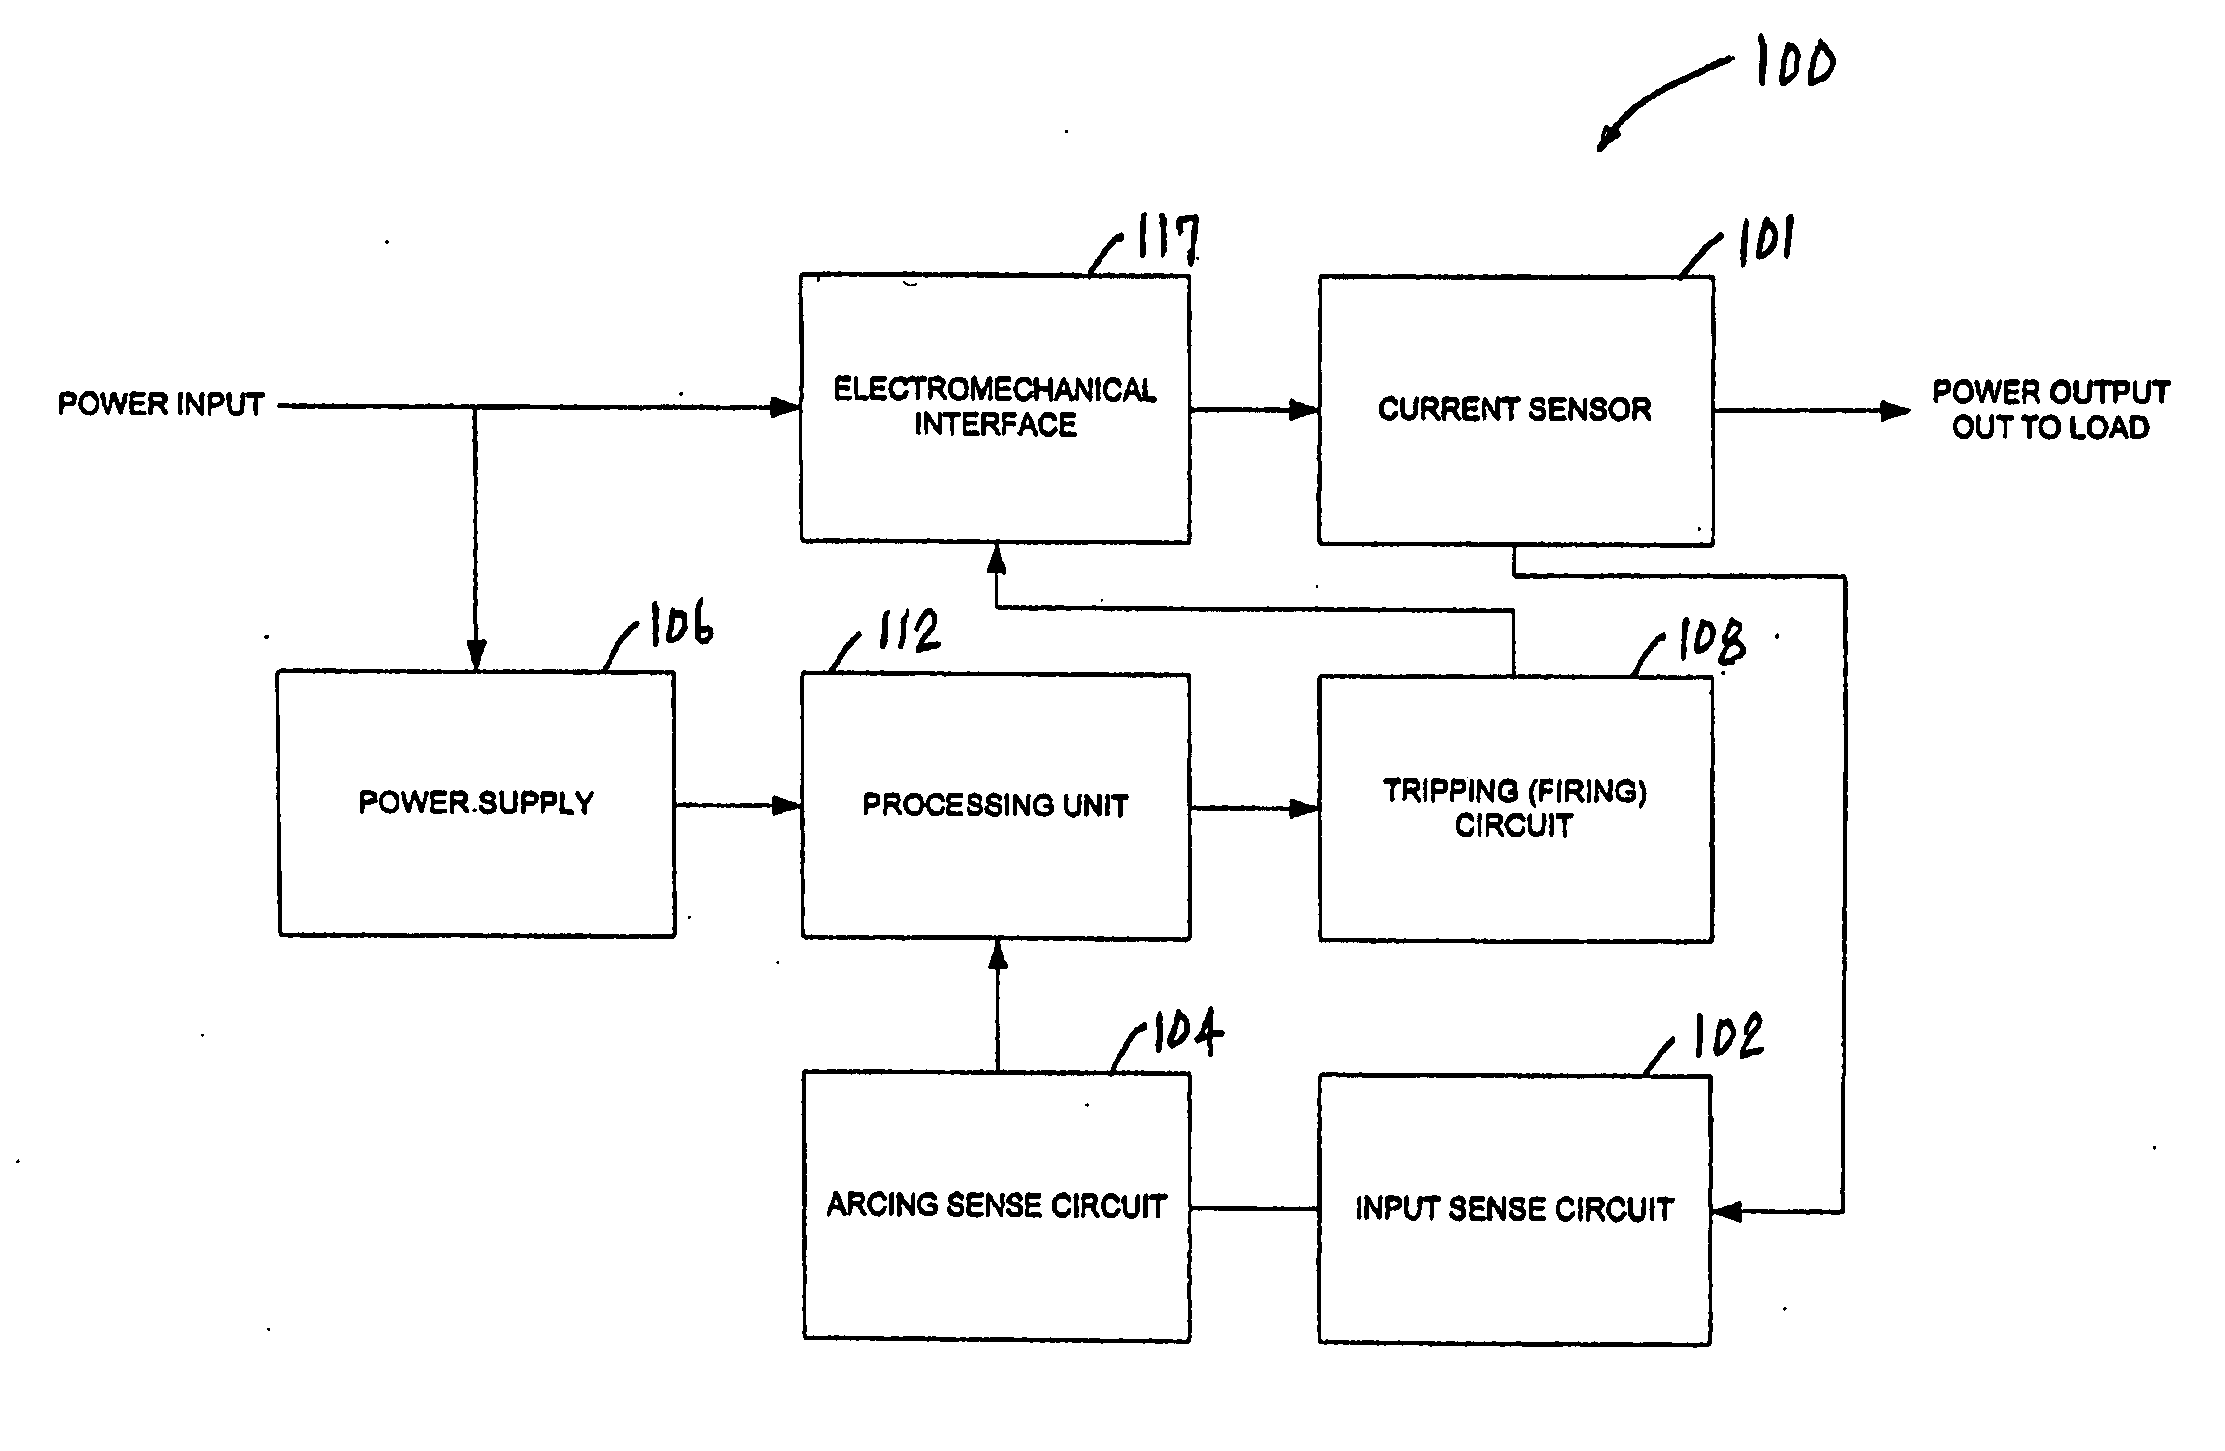 Methods of detecting arc faults characterized by consecutive periods of arcing